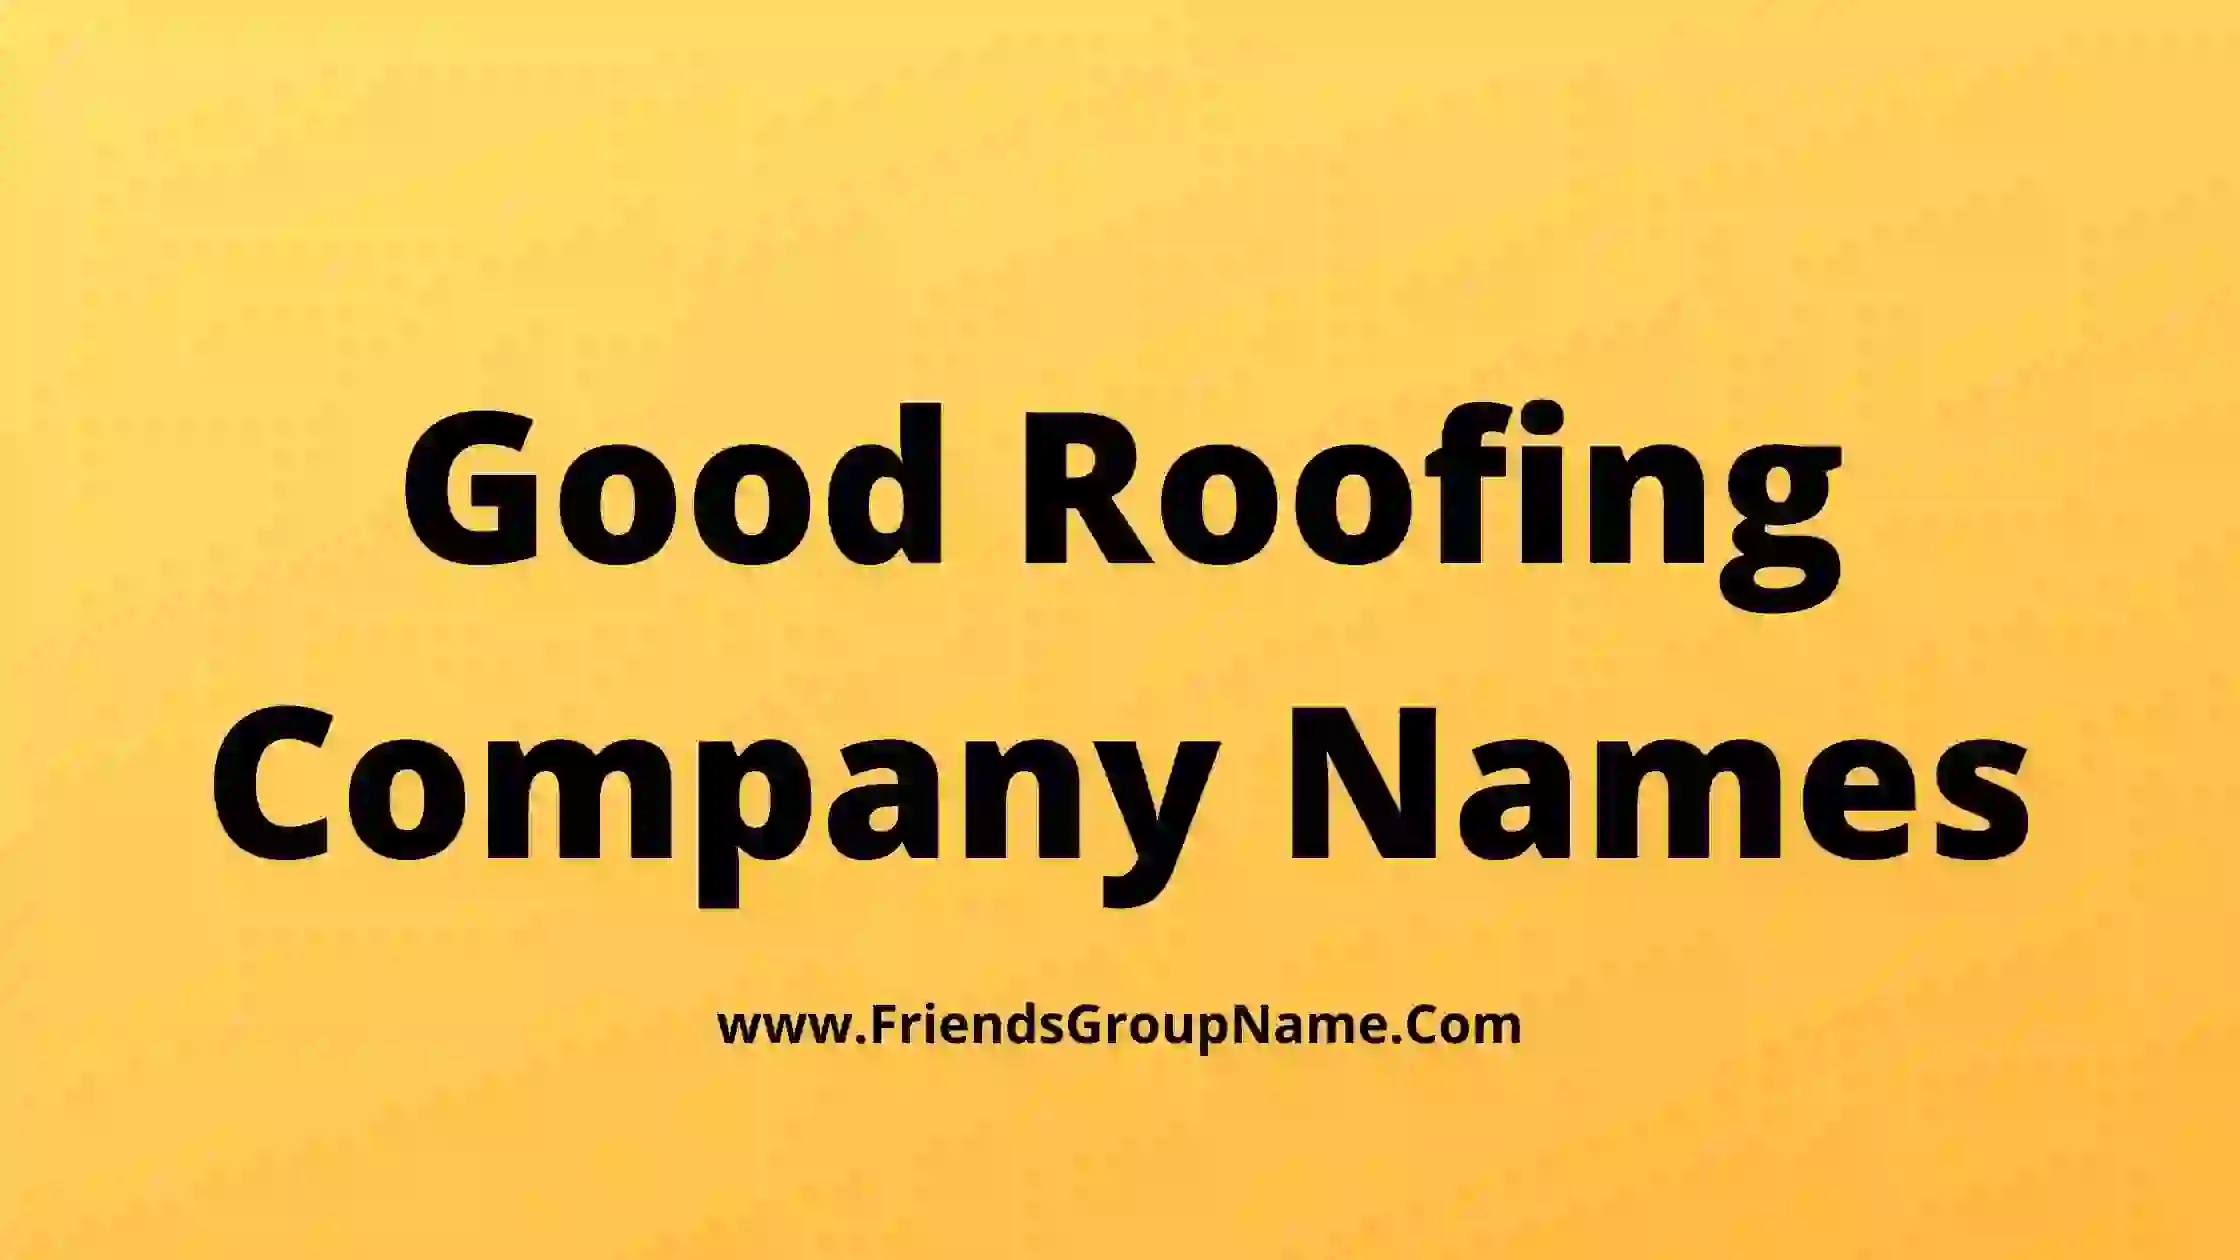 Good Roofing Company Names